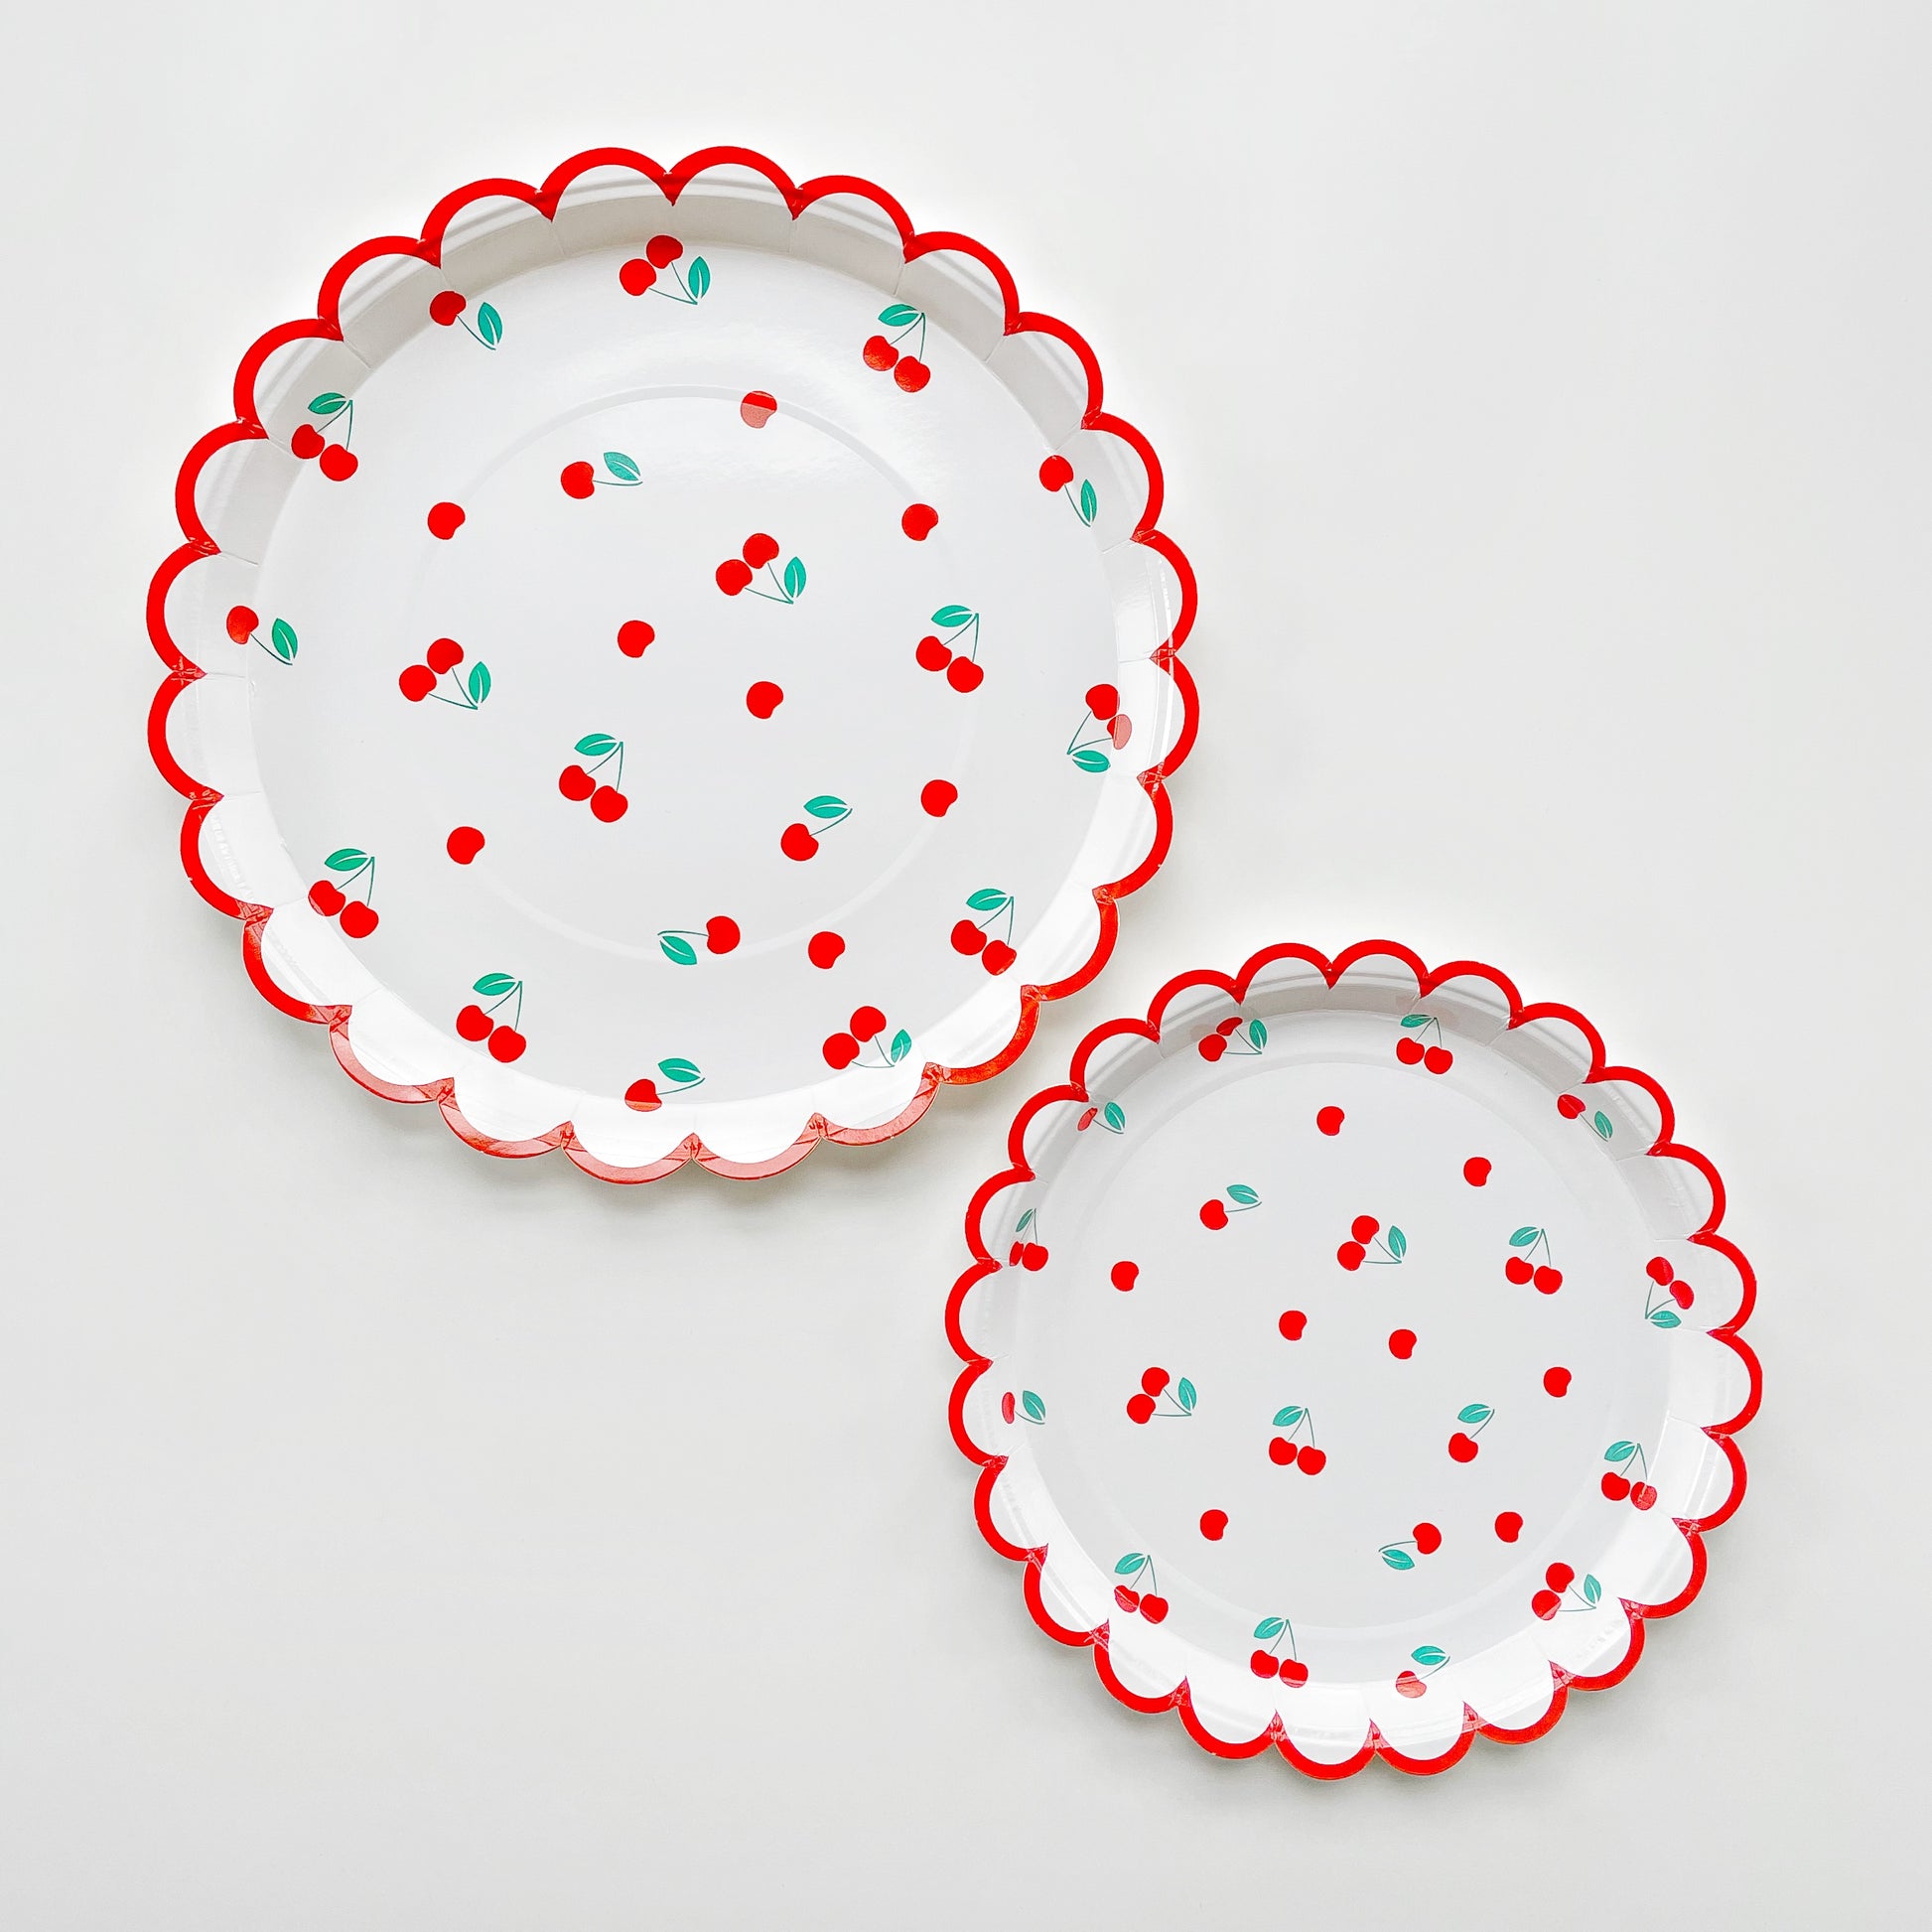 The large and small Cherry paper party plates have a red scalloped edge. The cherry pattern includes red, white and green colours.  